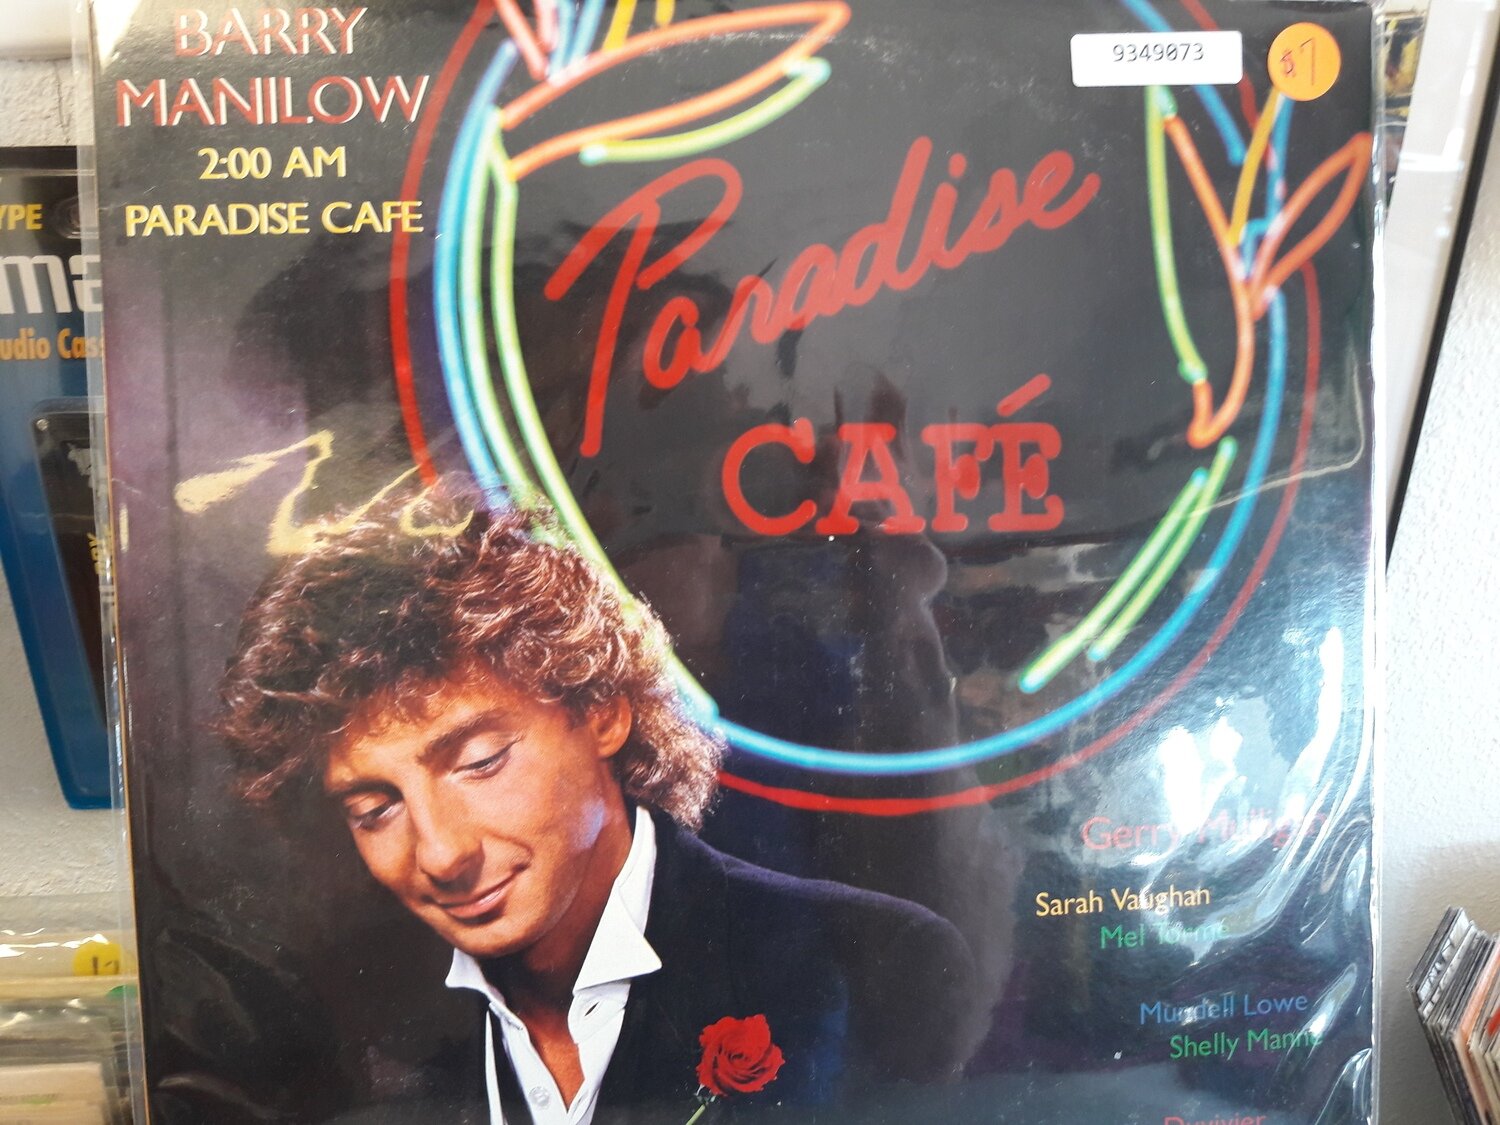 Manilow, Barry 2 a.m. Paradise Cafe